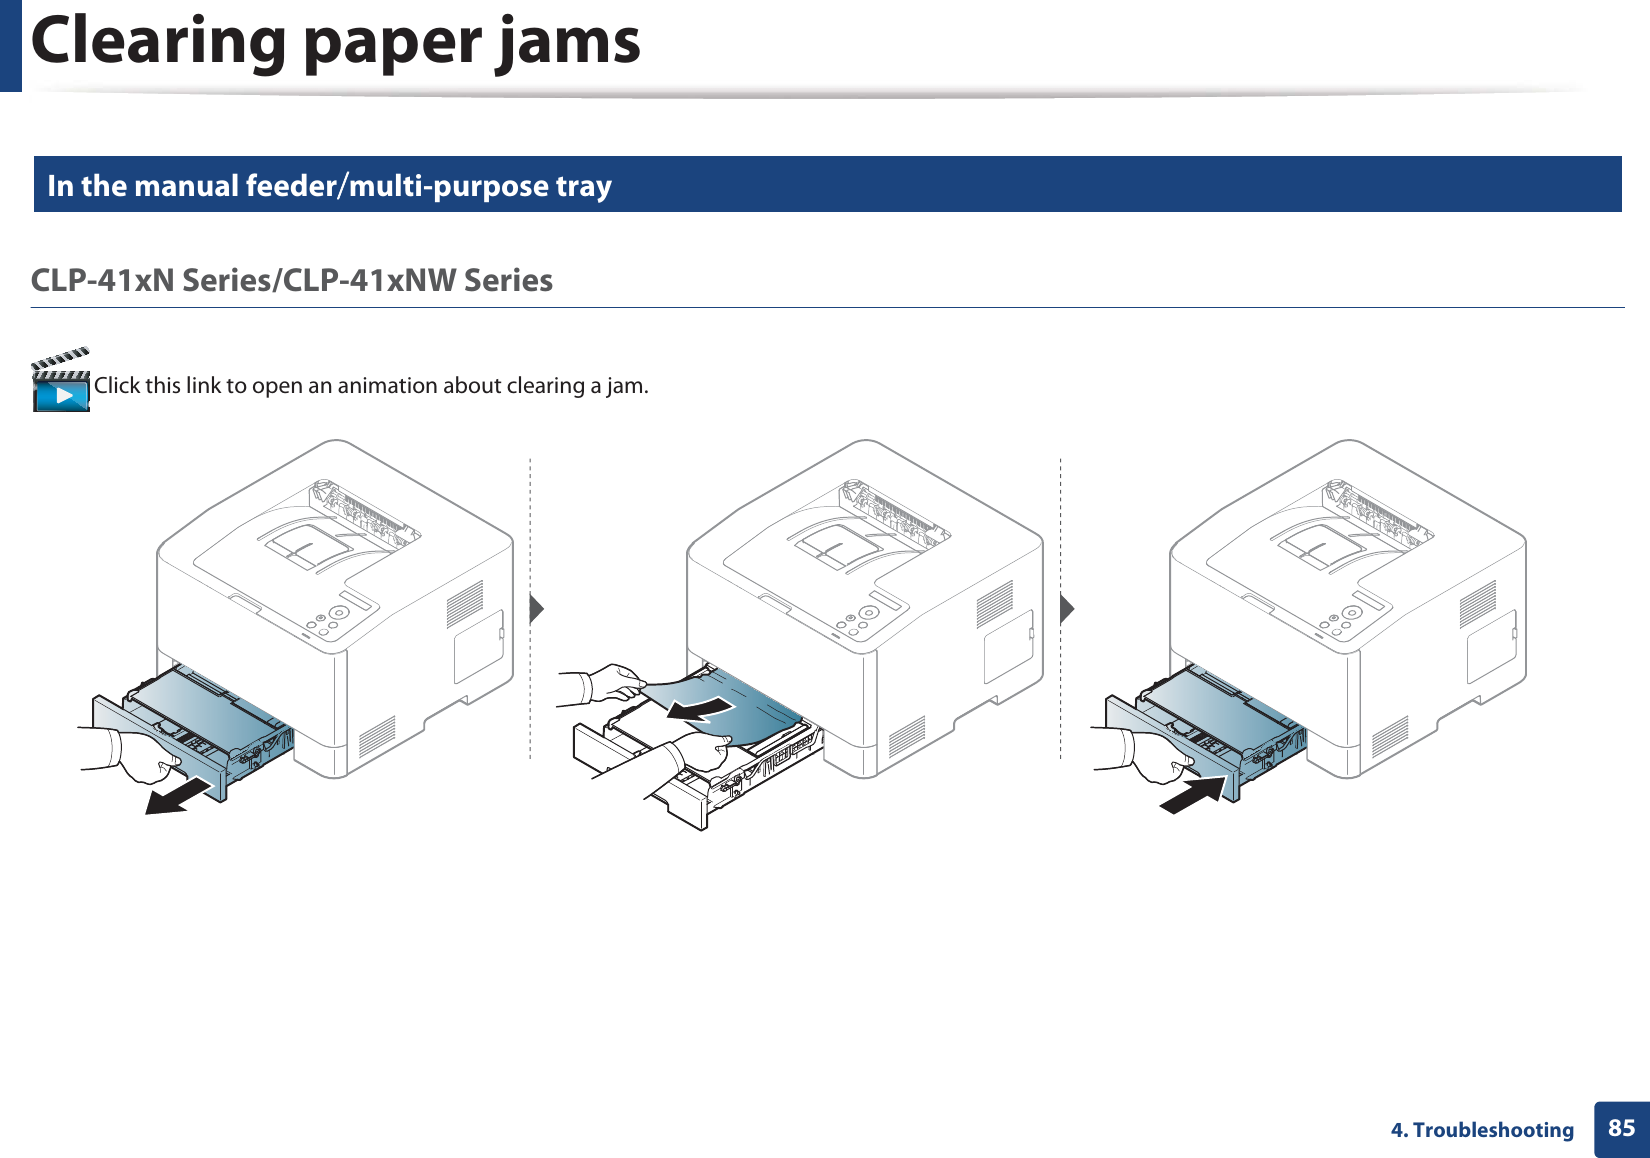 Clearing paper jams854. Troubleshooting3 In the manual feederVmulti-purpose tray CLP-41xN Series/CLP-41xNW Series Click this link to open an animation about clearing a jam.